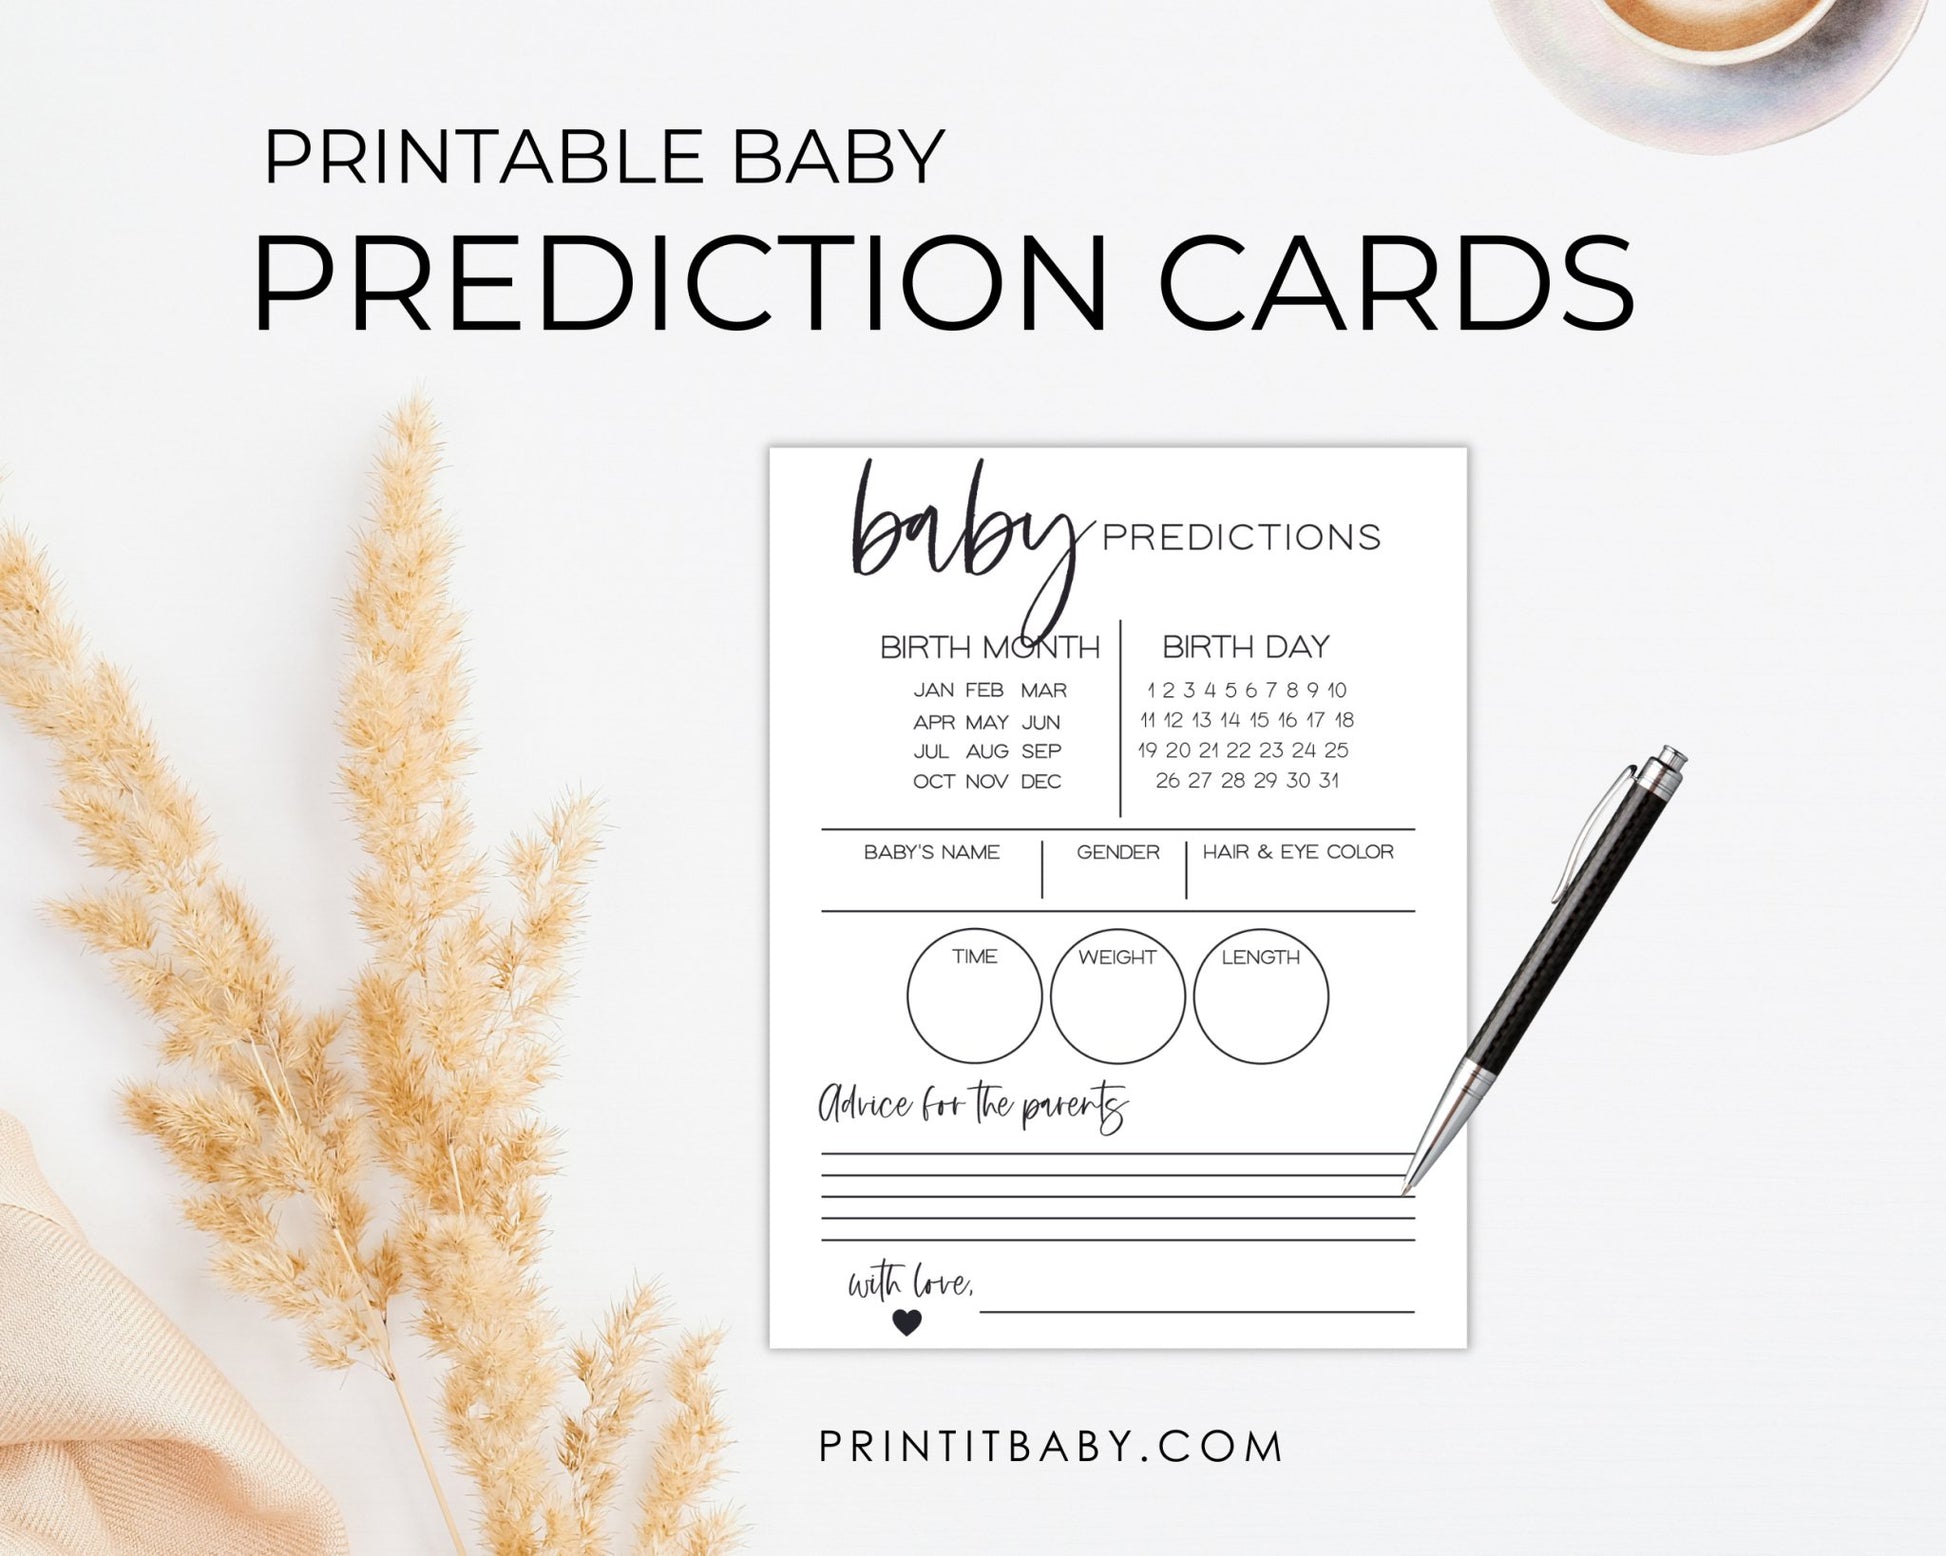 FREE Baby Shower Bundle: Planning That Baby Shower Just Got Easier! - Print It Baby